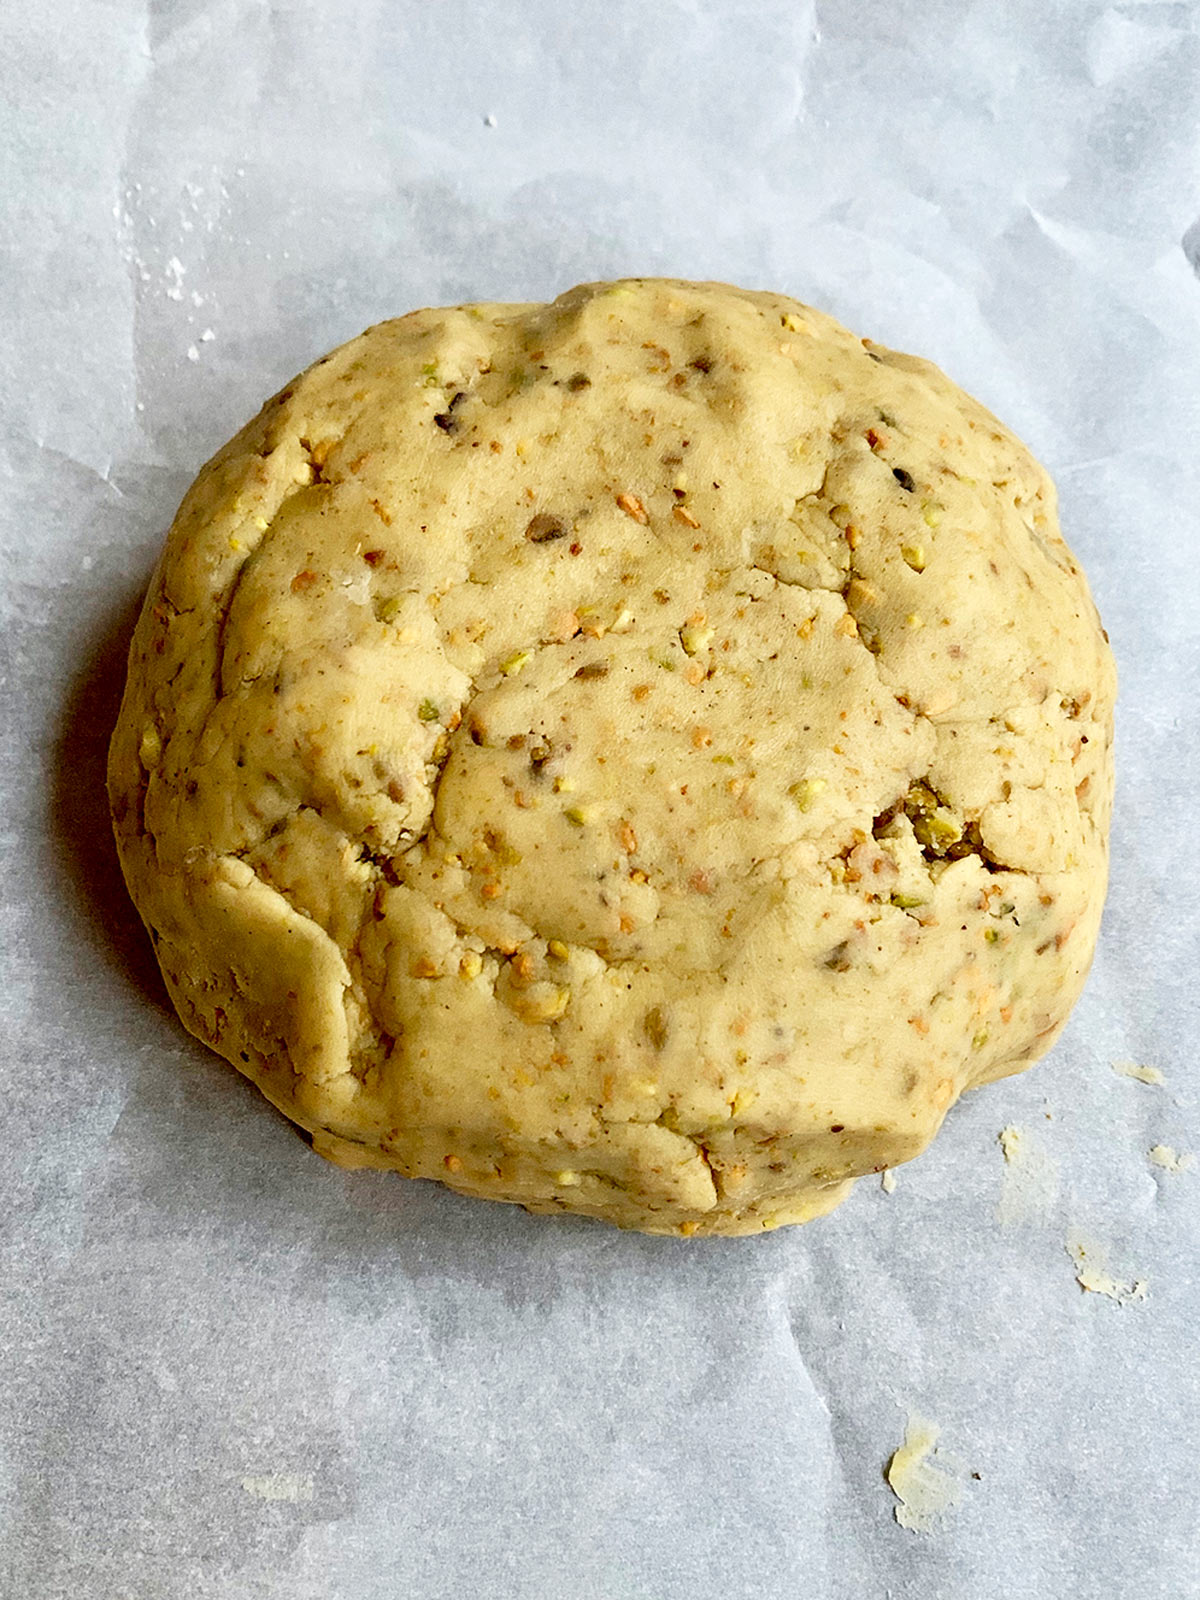 Ball of cookie dough ready to chill.